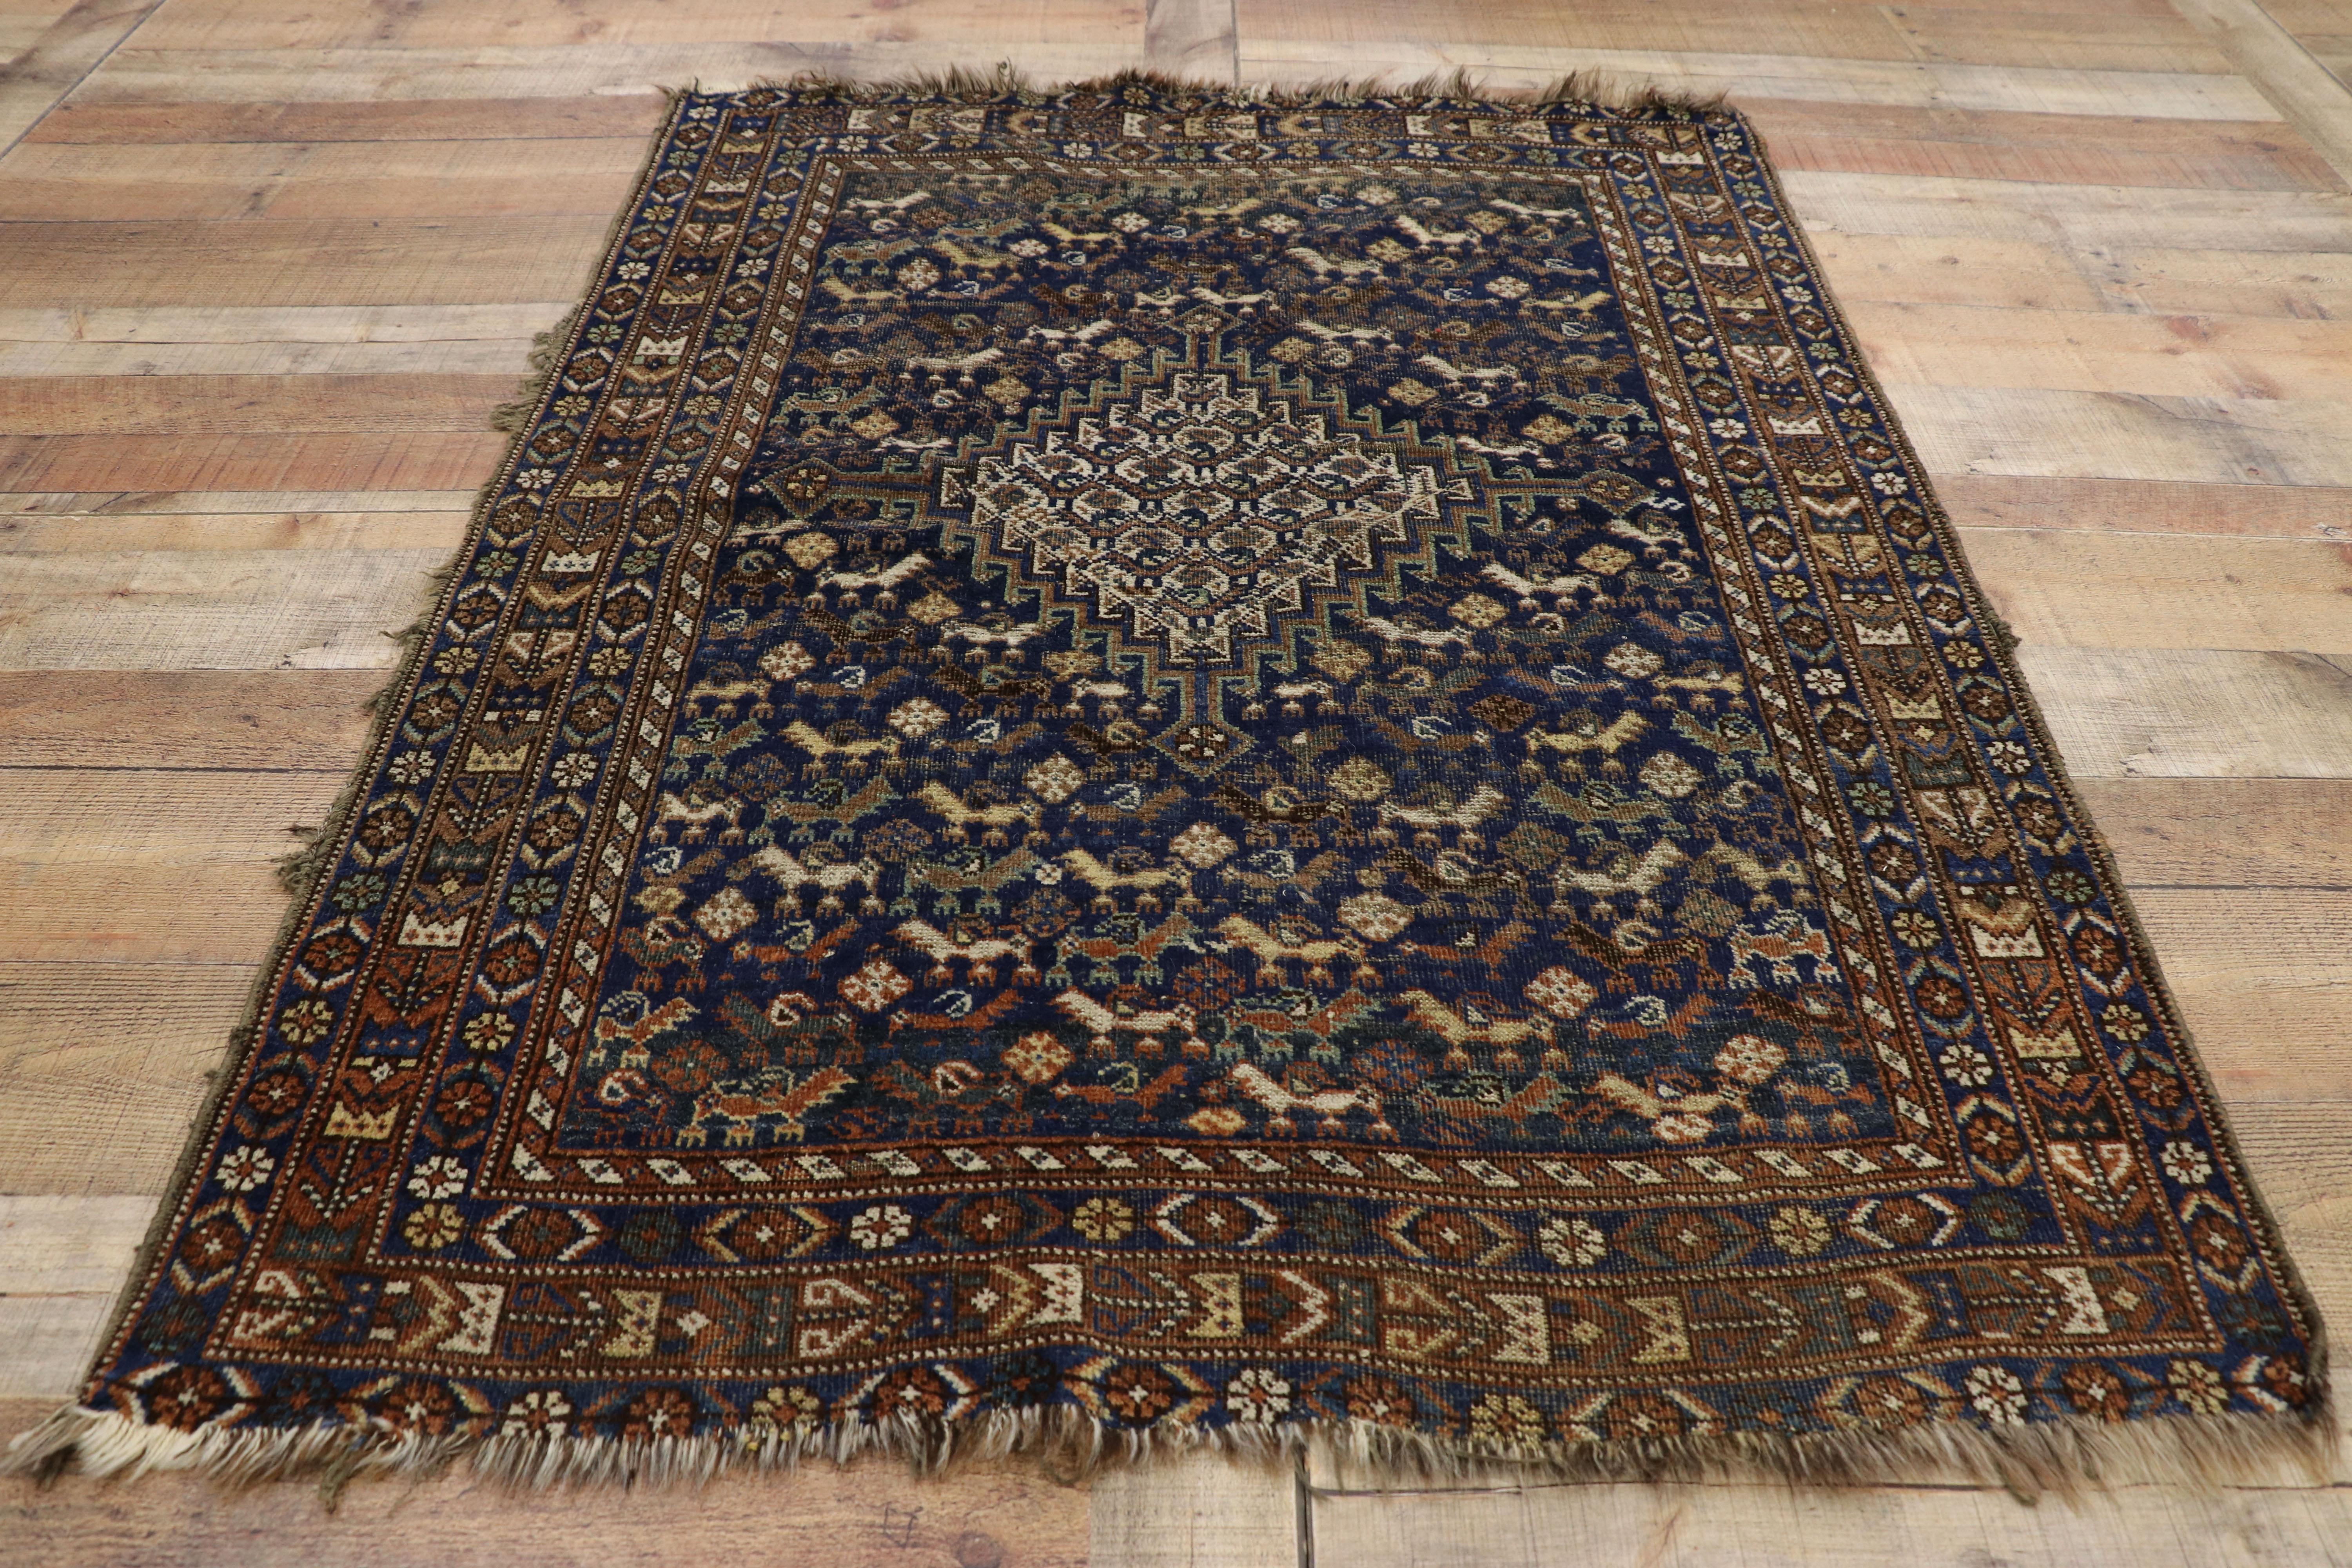 Worn-In Distressed Antique Persian Shiraz Accent Rug with Adirondack Lodge Style For Sale 1